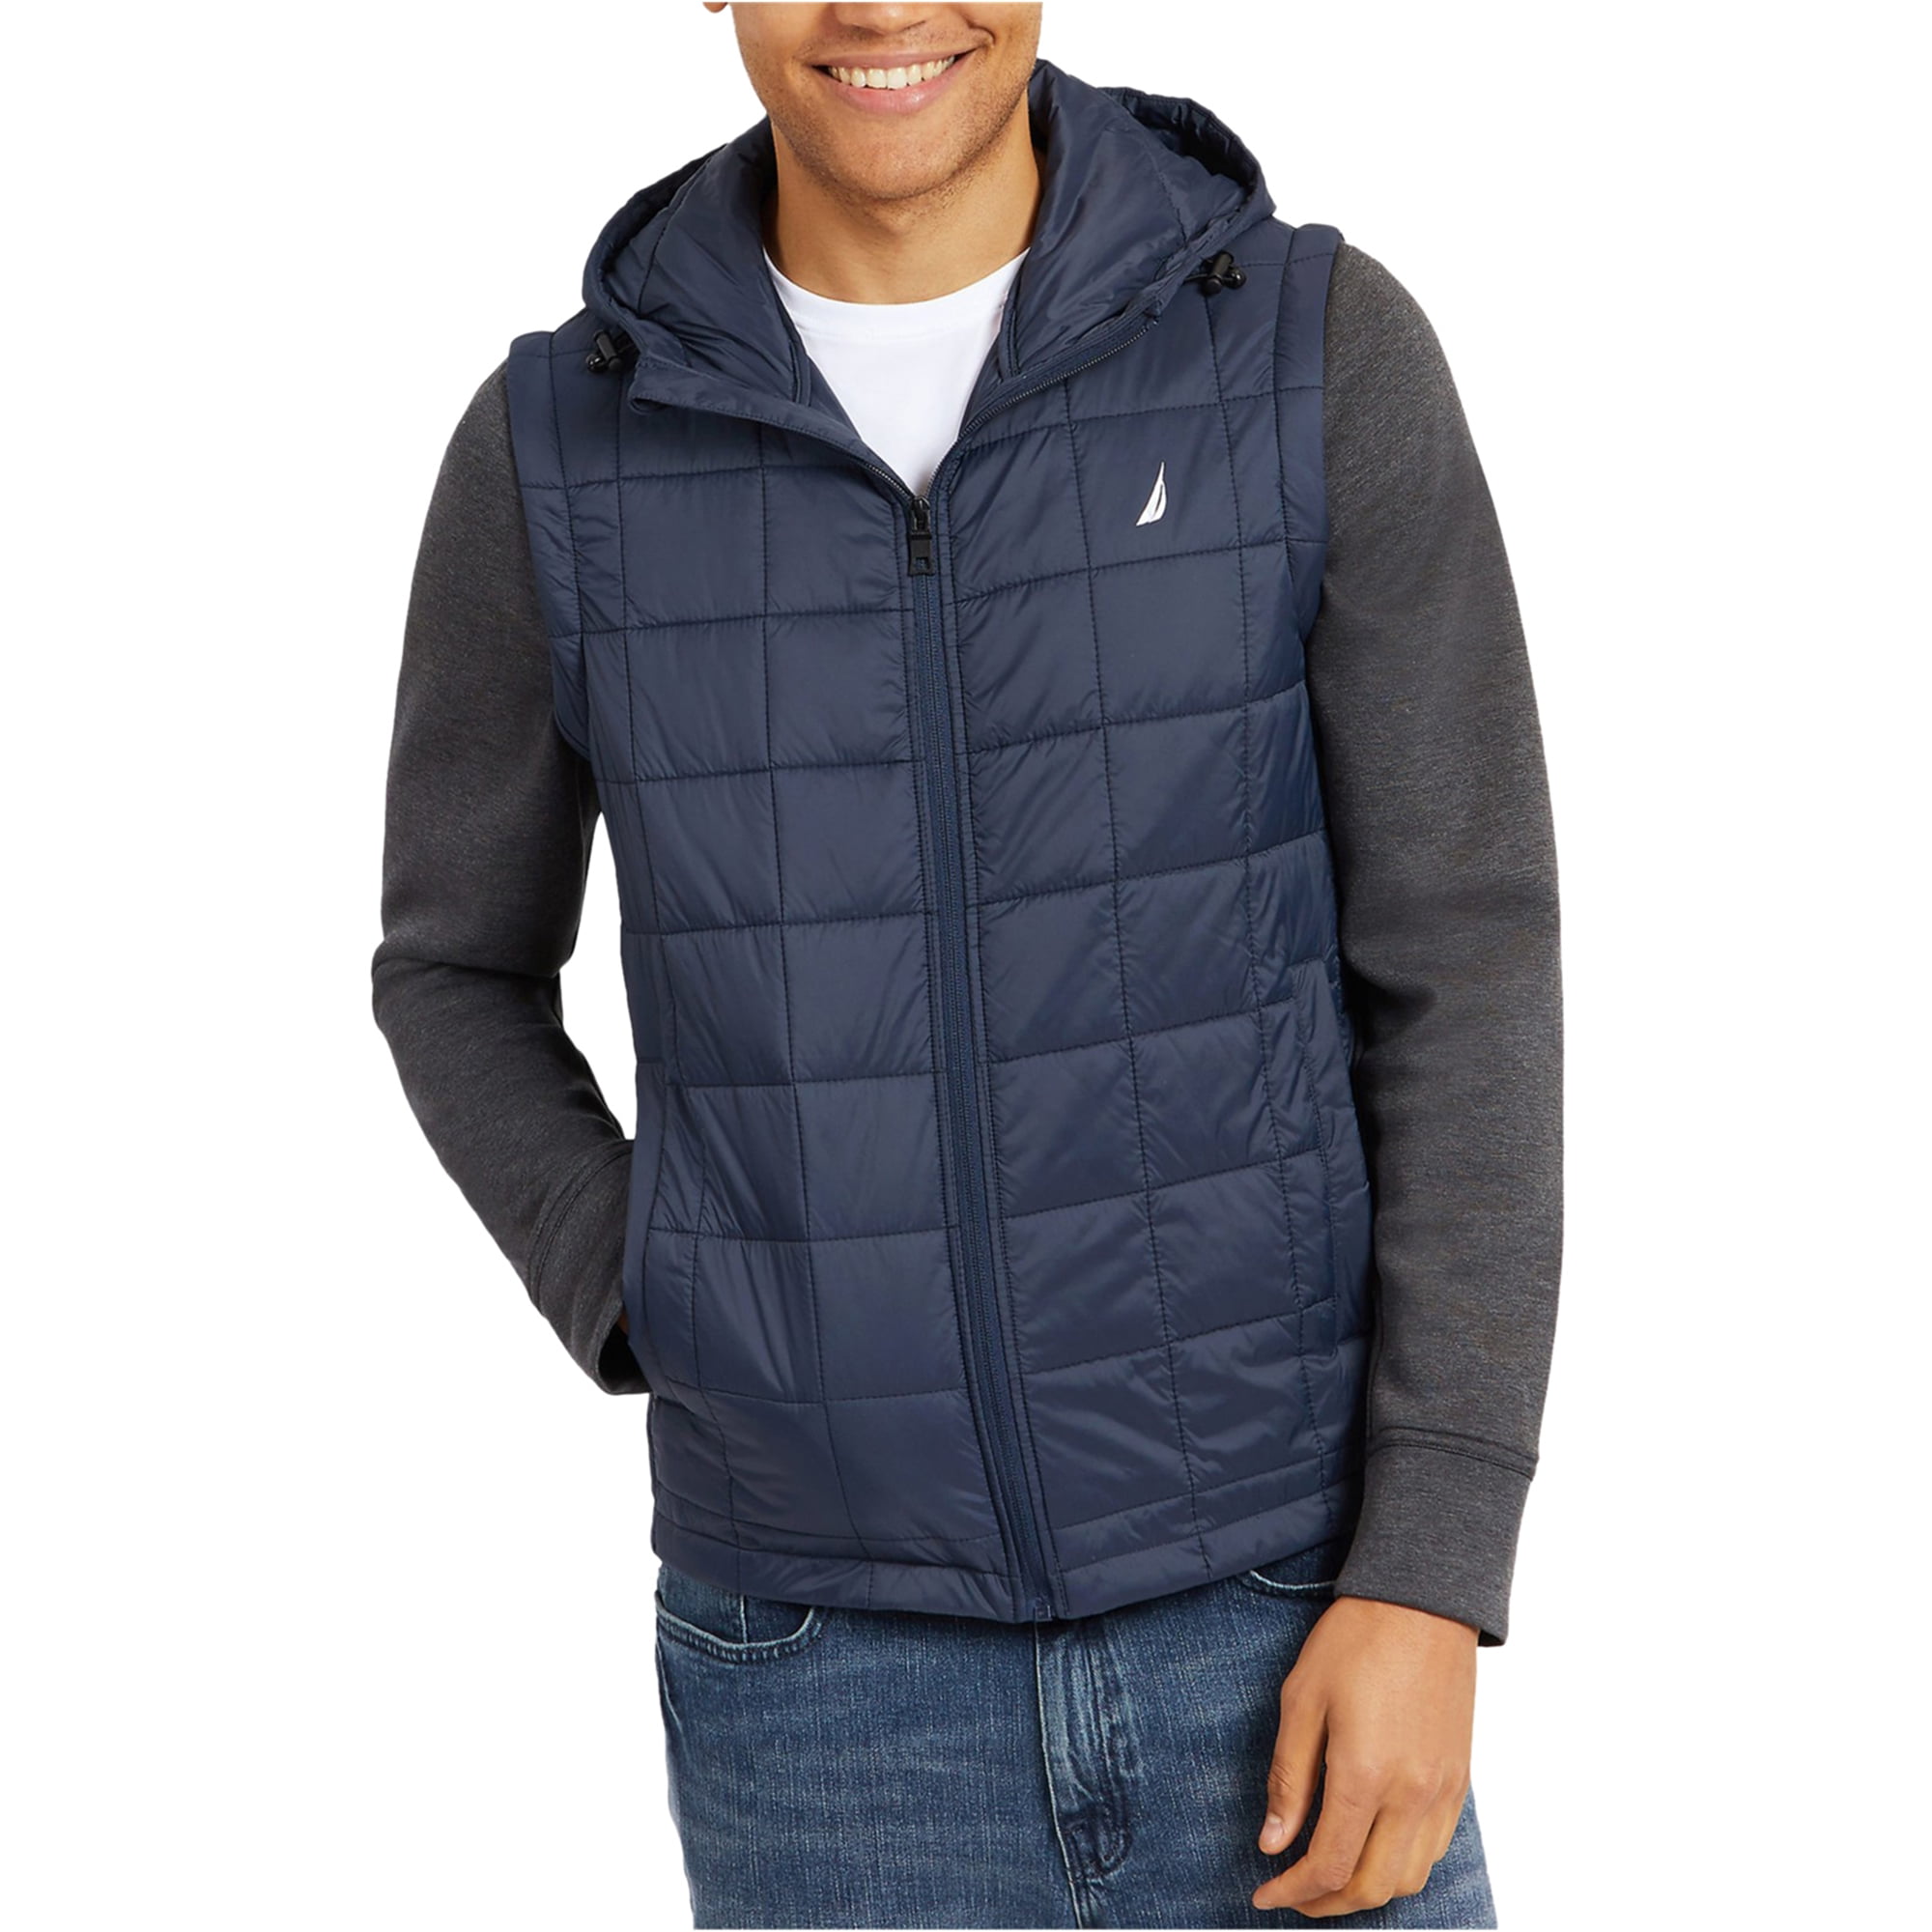 Nautica Womens Diamond Quilted Puffer Coat with Hood 